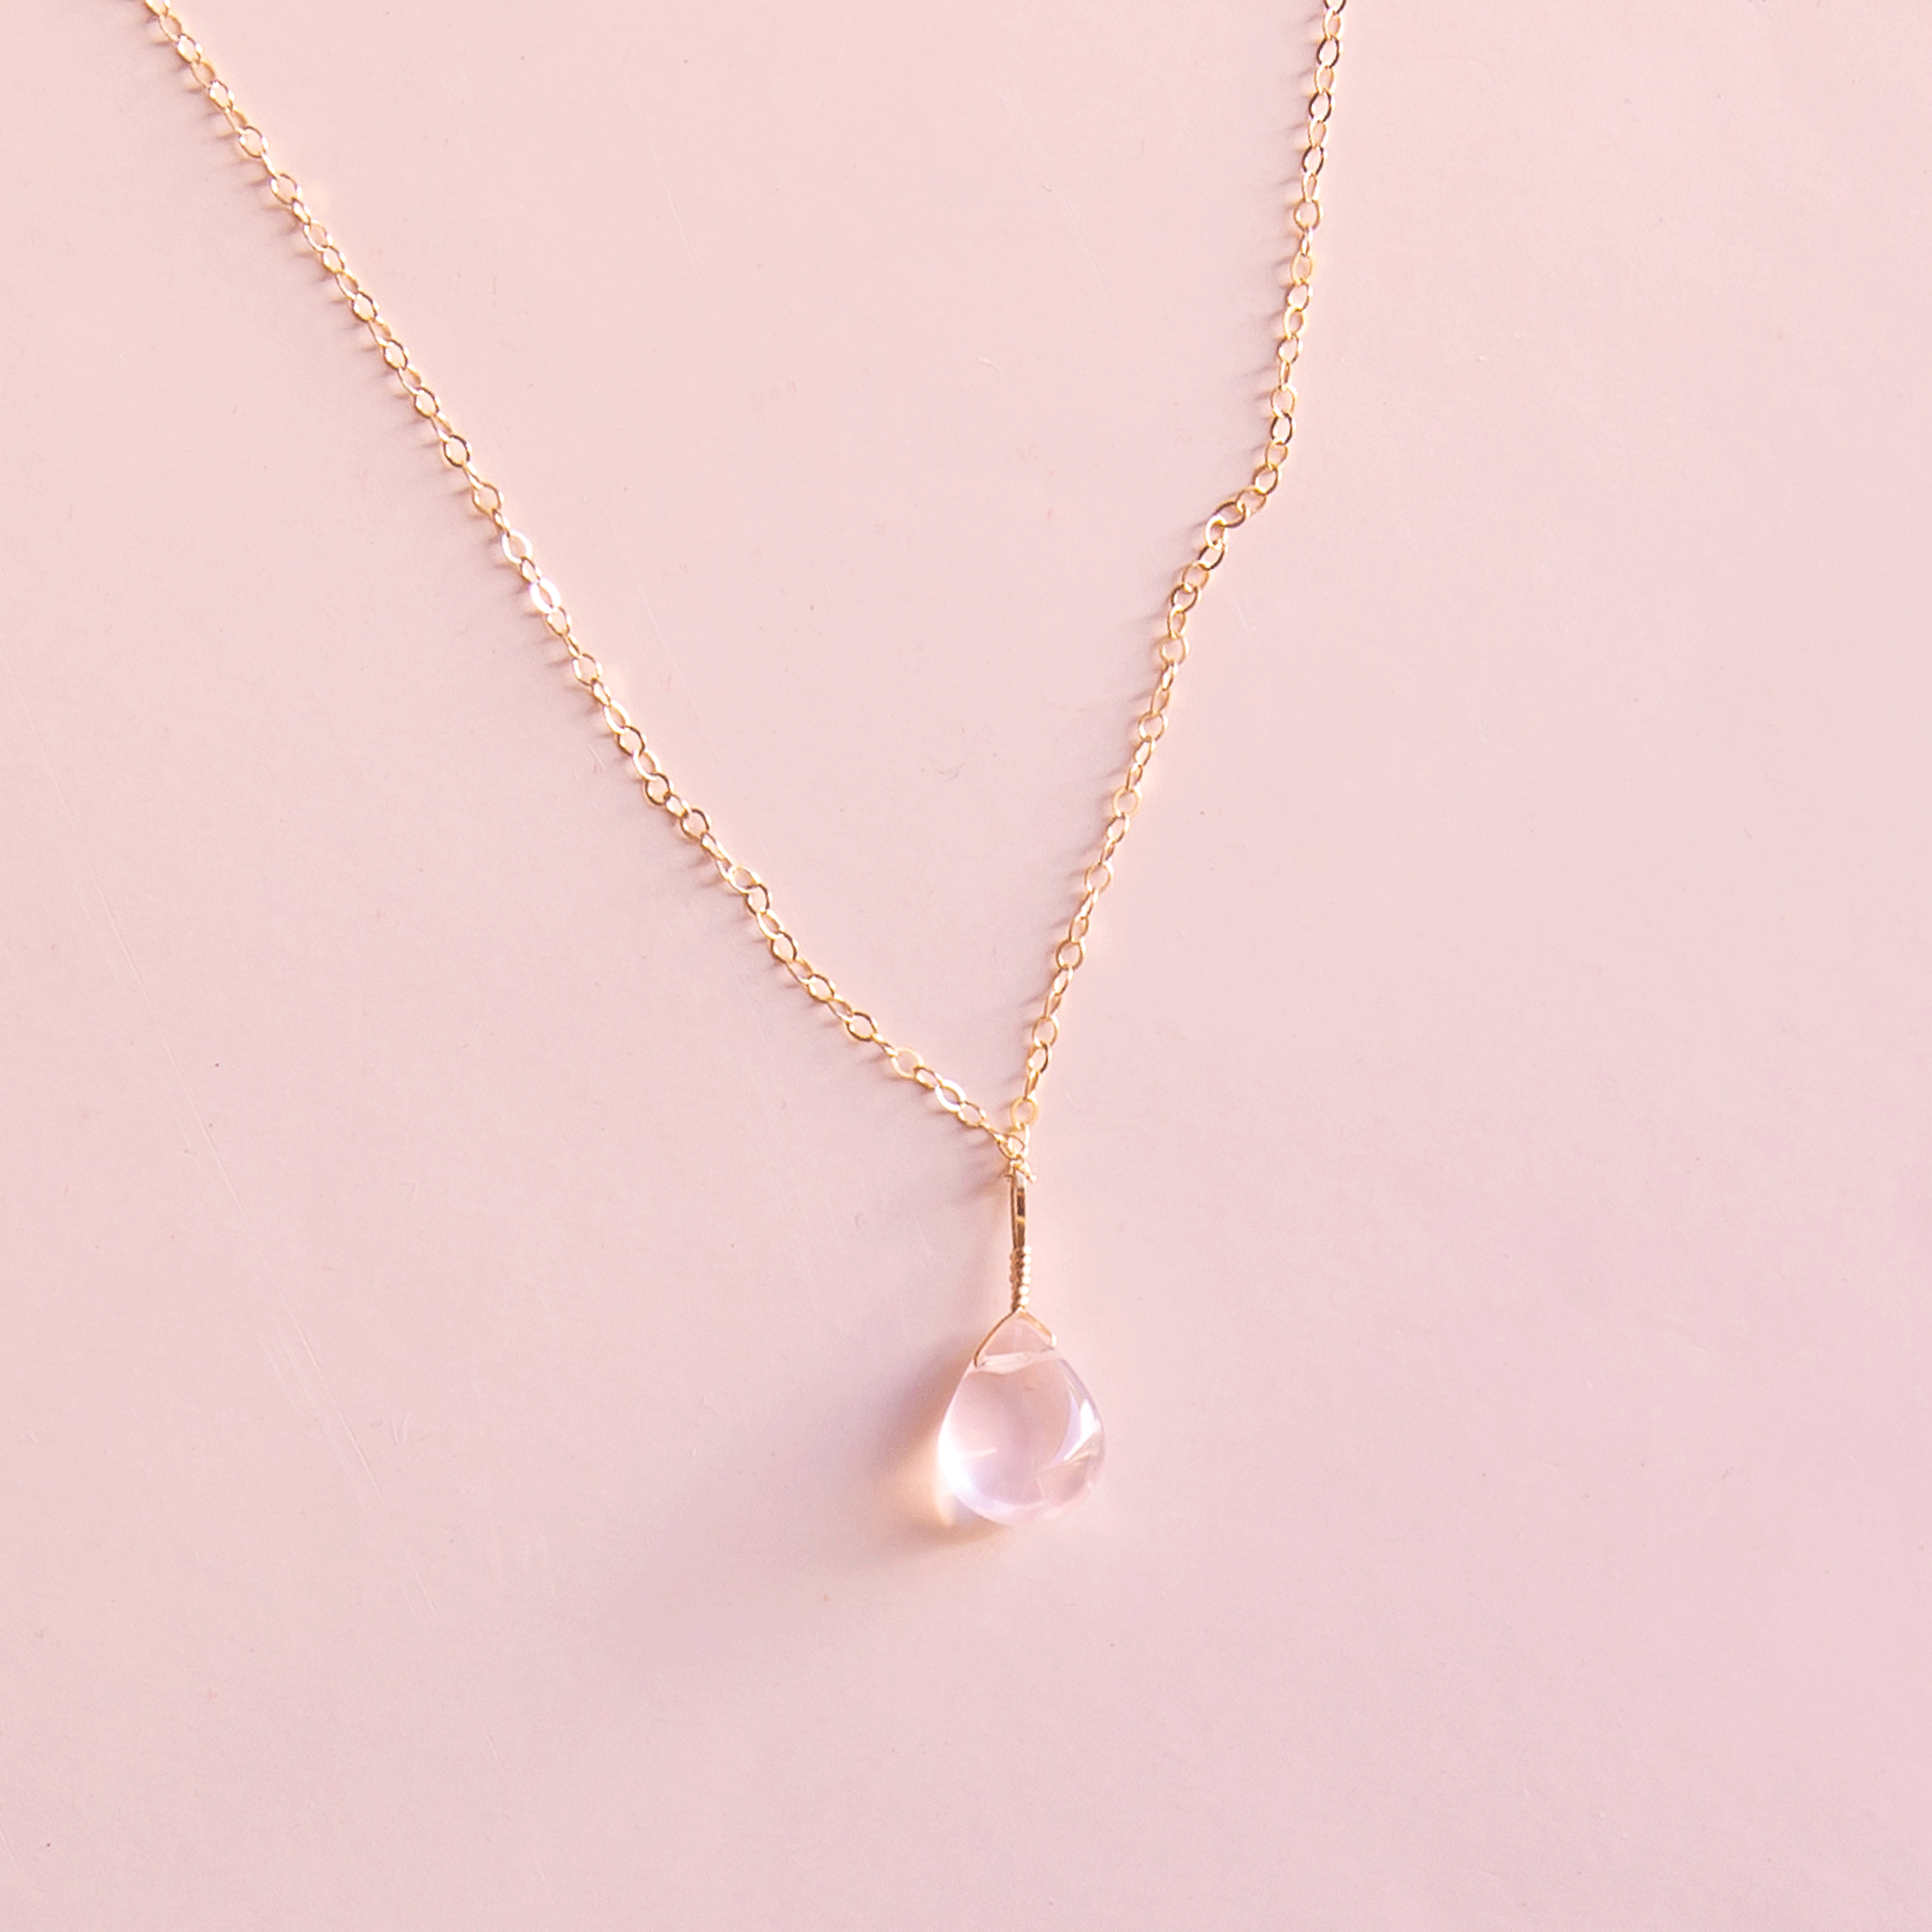 On a neutral background is a gold chain necklace with a rose quartz stone in the center.